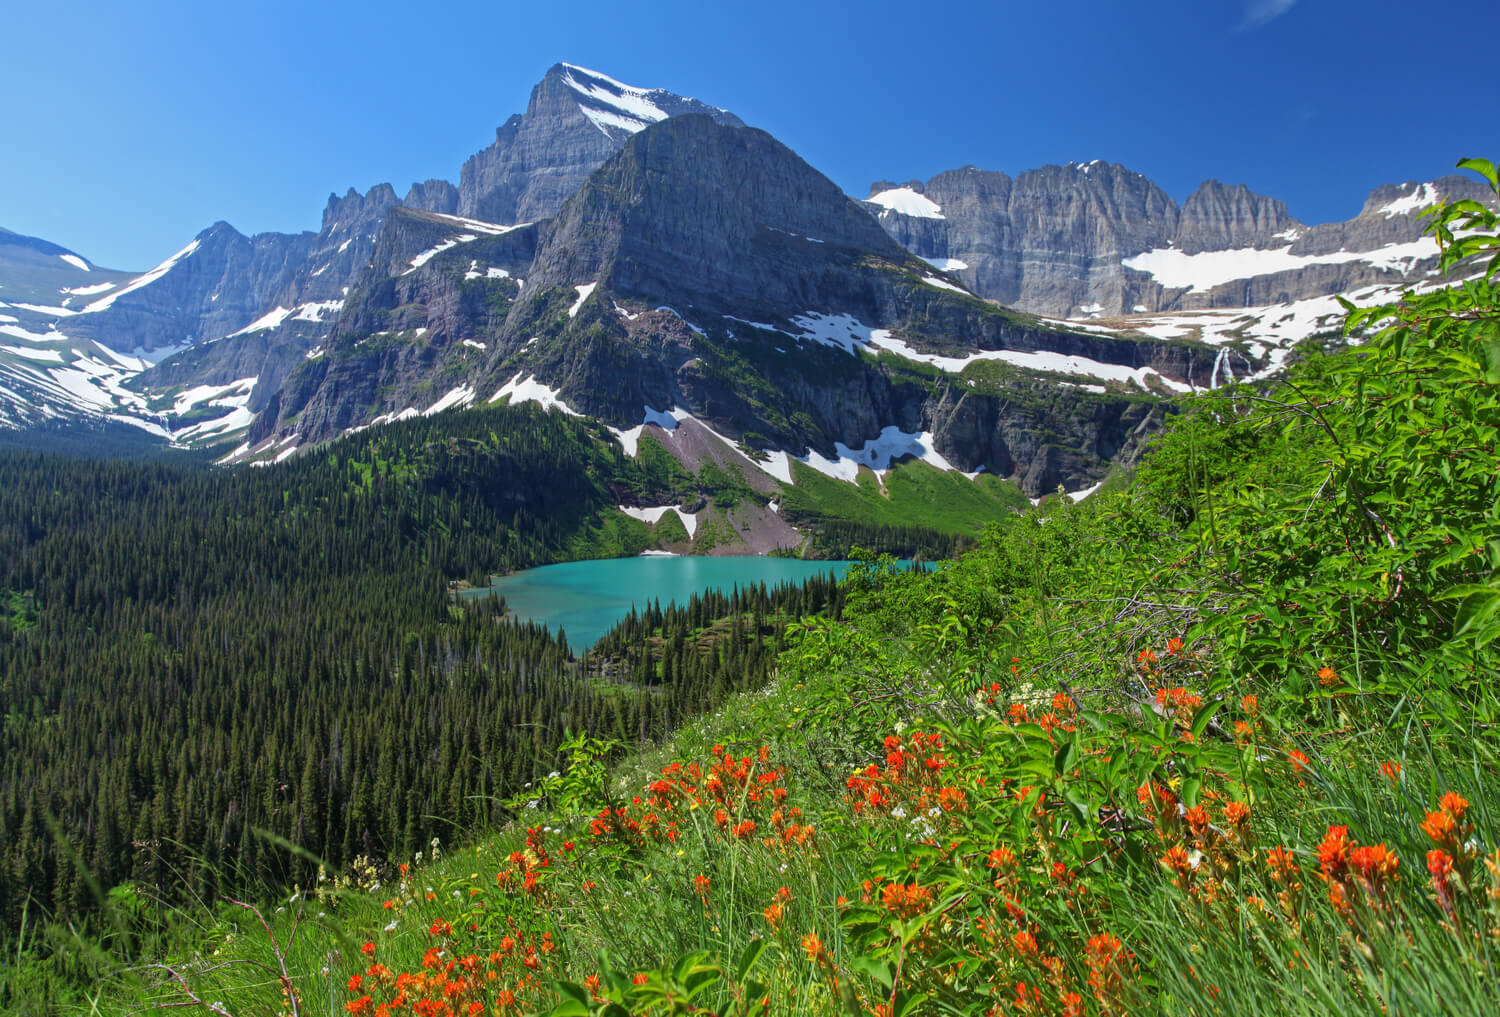 An emerald lake with craggy mountain in background.